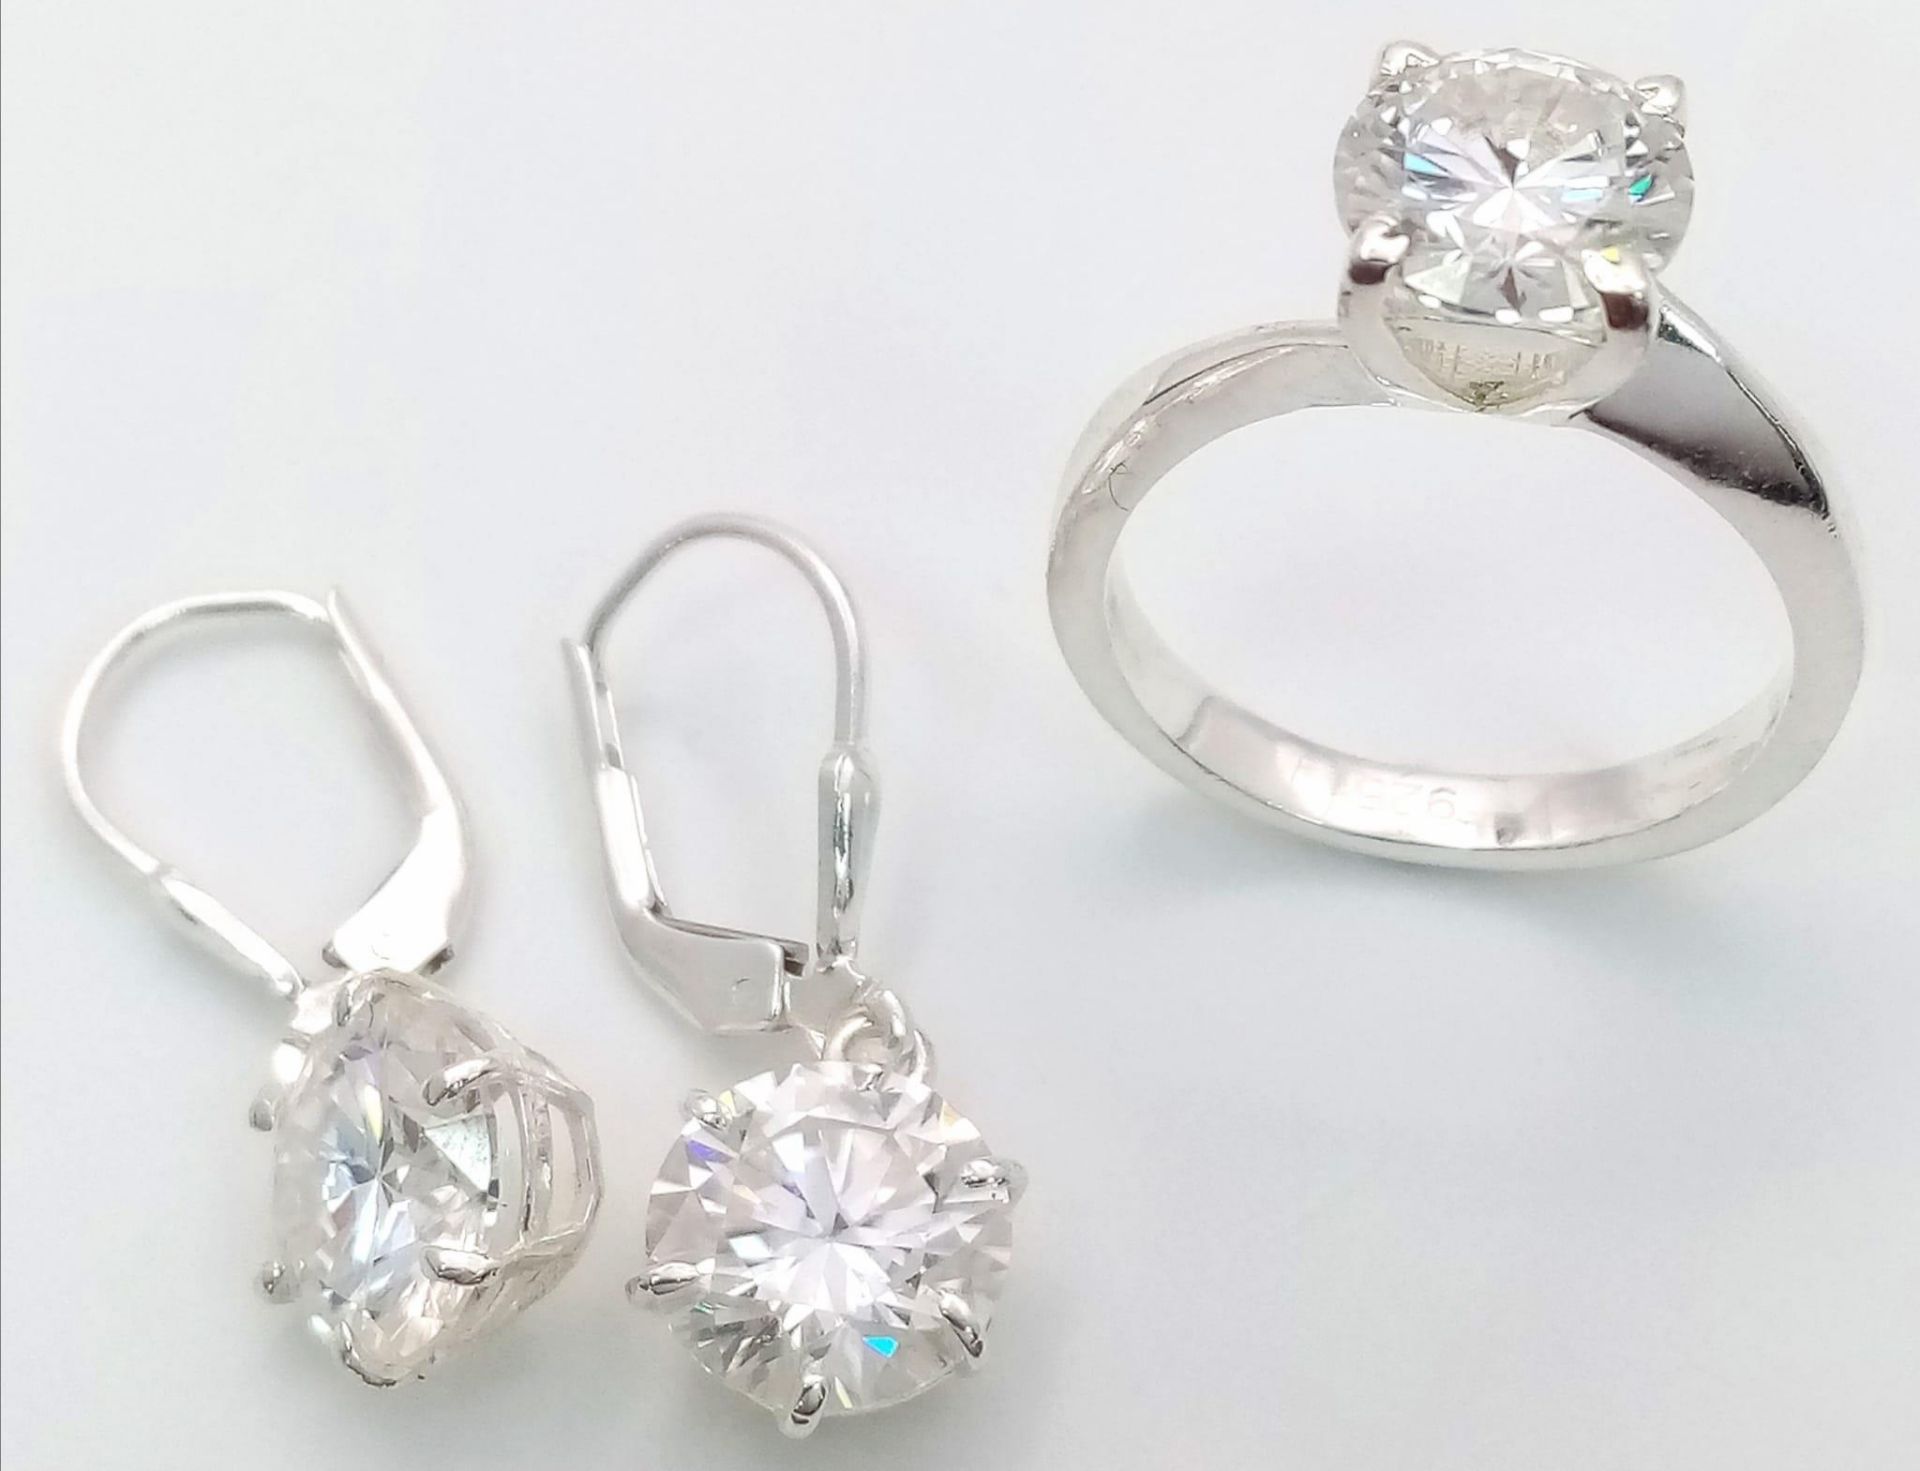 A White Moissanite Ring with a Matching Pair of Moissanite Earrings. 7ctw of moissanite. Ring size